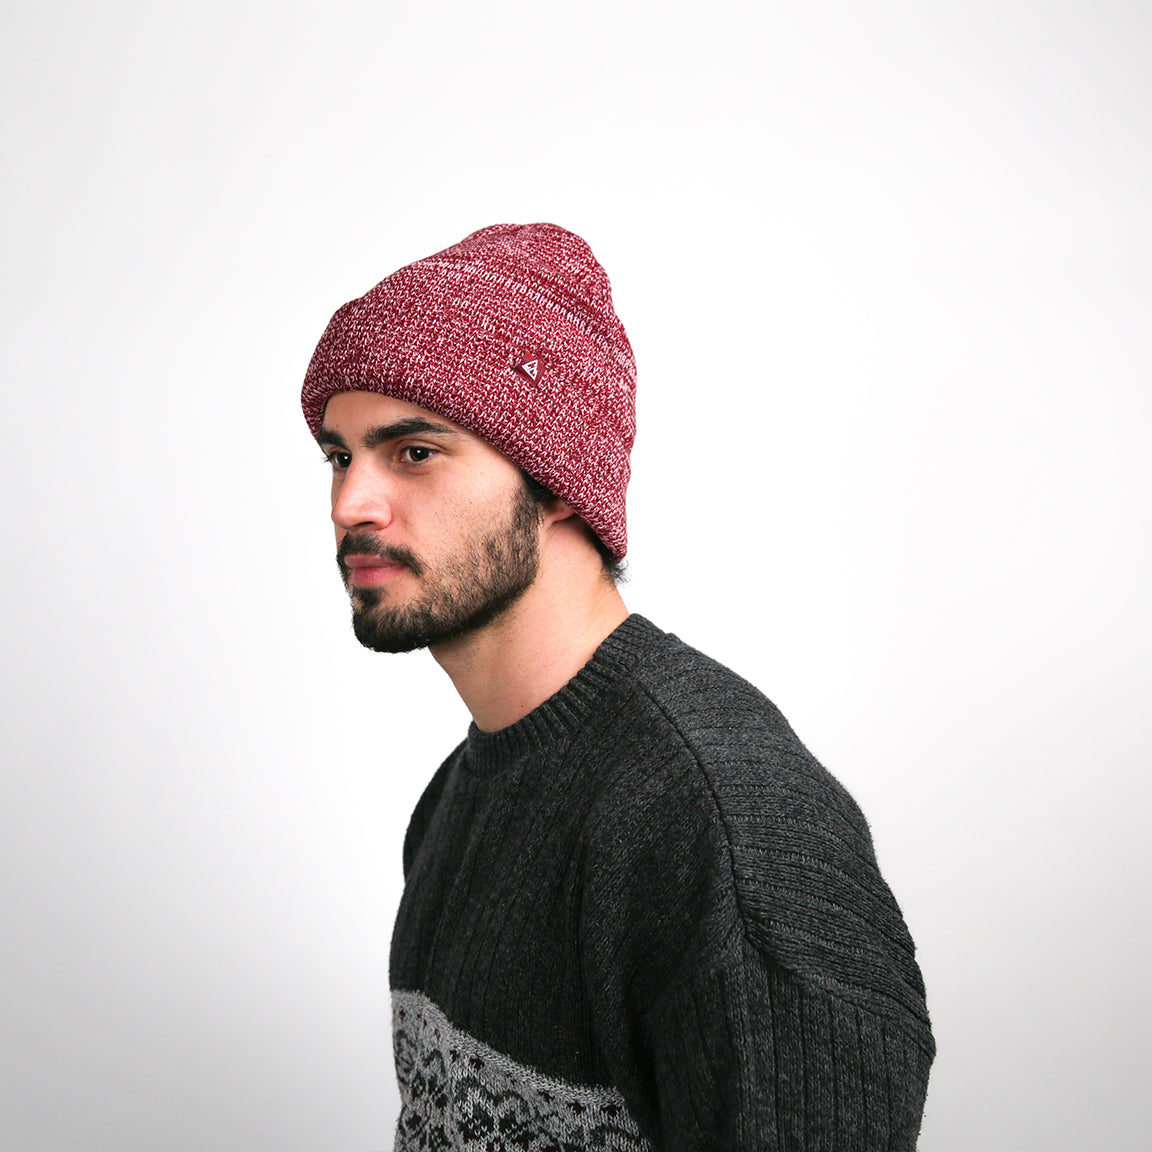 The model presents the beanie with a casual tilt, highlighting the easygoing nature of the piece, while the burgundy color serves as a vibrant accent.